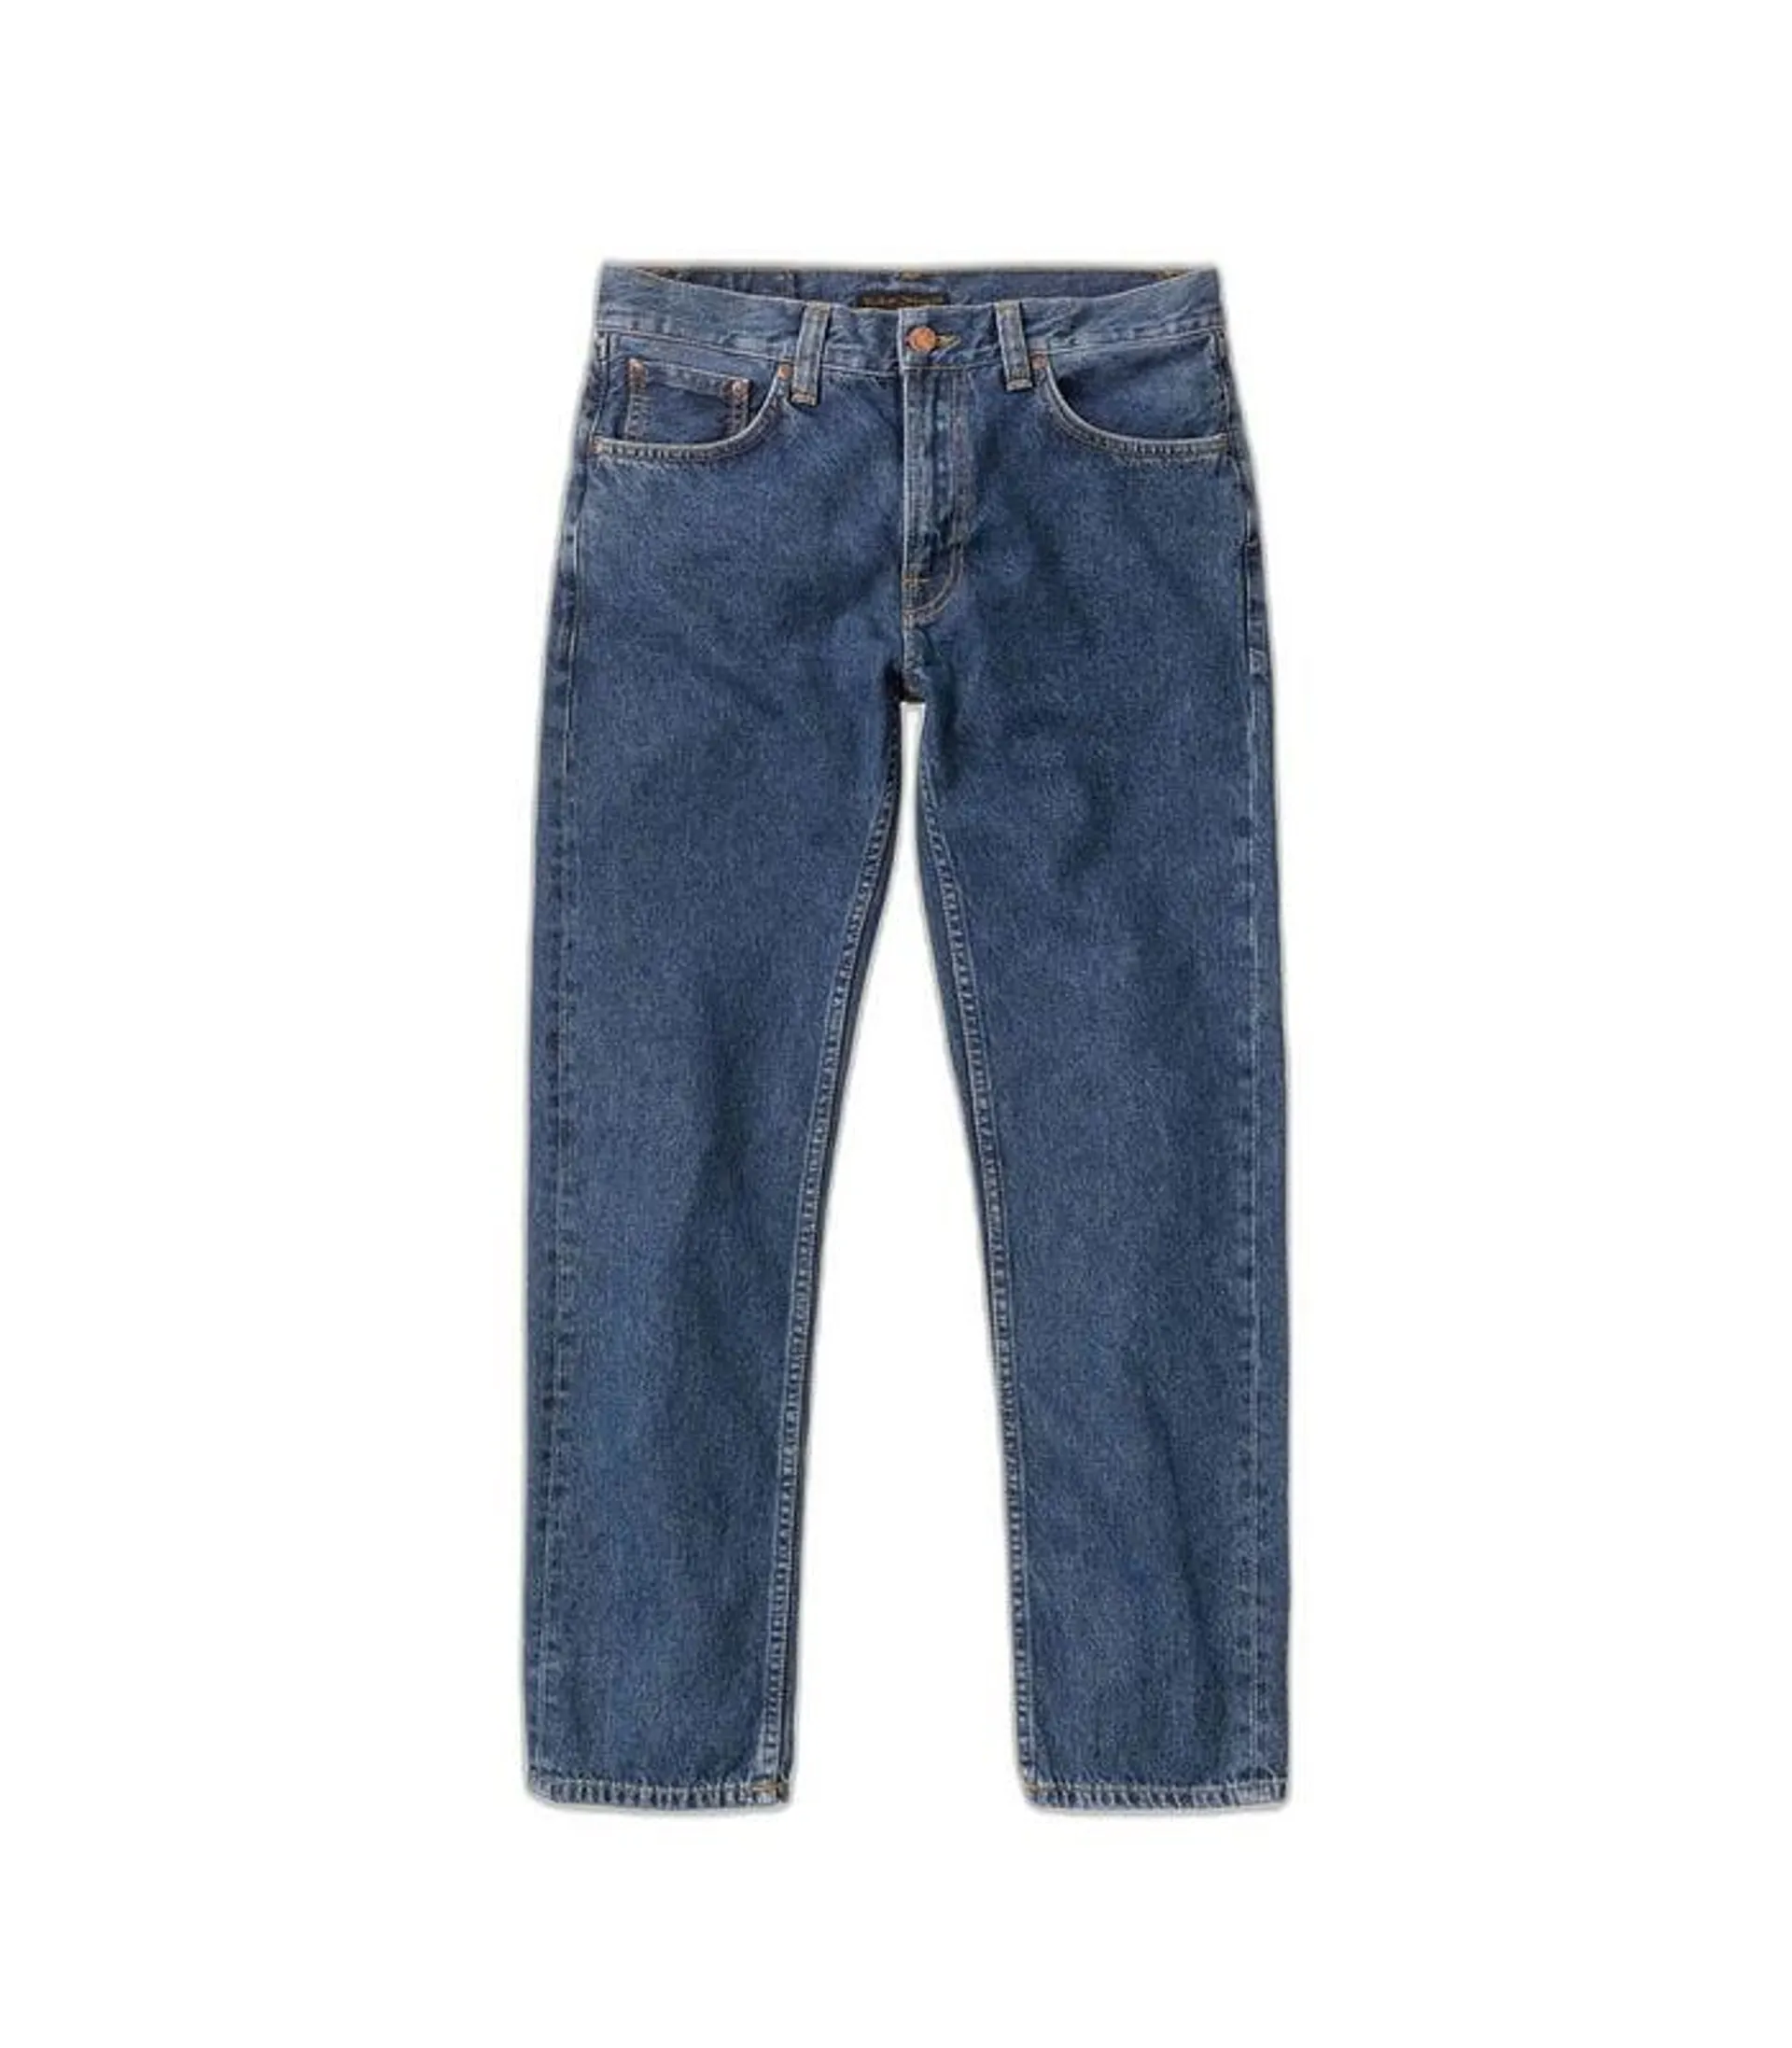 Jeans Gritty Jackson 90s